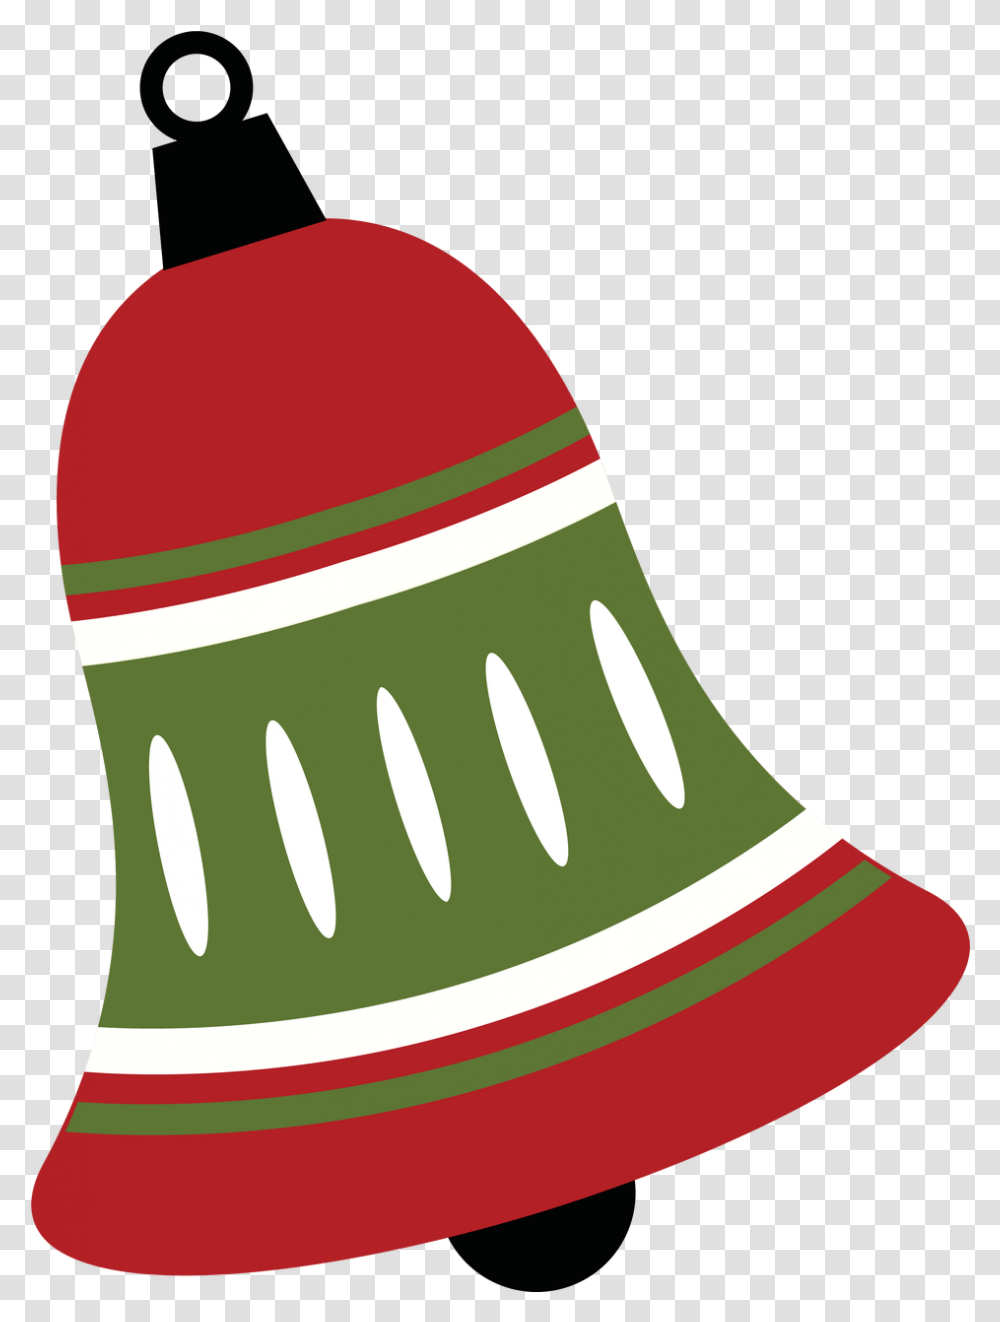 Christmas Bell Svg Cut File Christmas Bell Cut Out, Clothing, Apparel, Shoe, Footwear Transparent Png